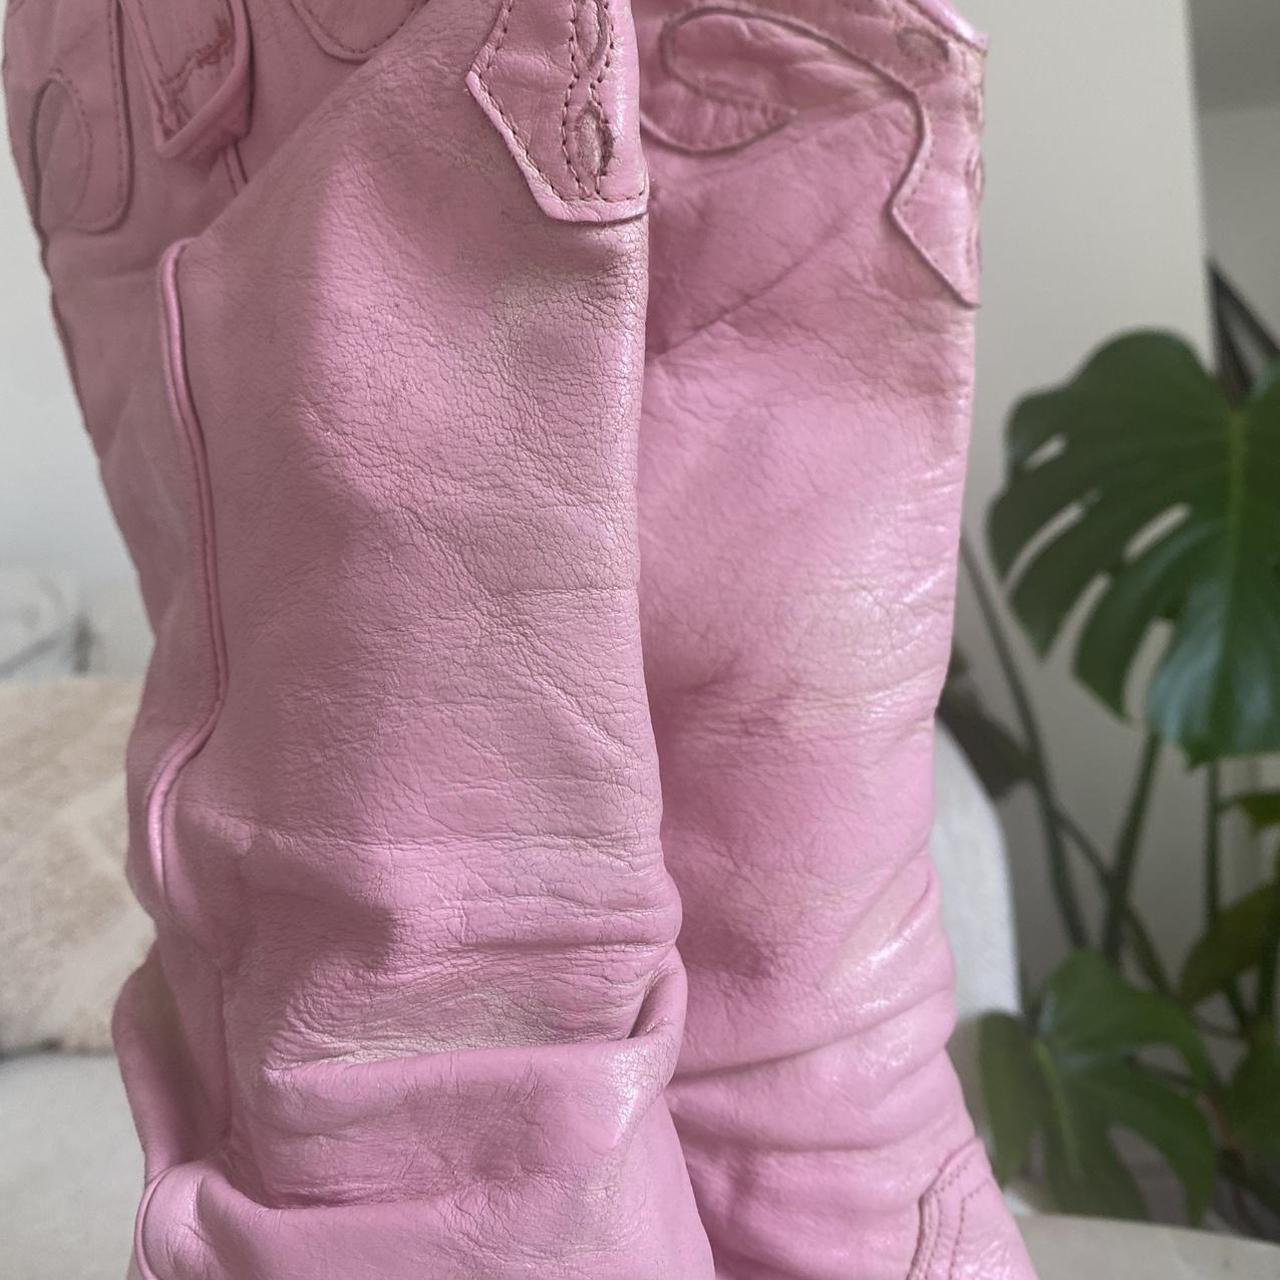 The coolest Spanish leather pink cowboy boots wooden... - Depop